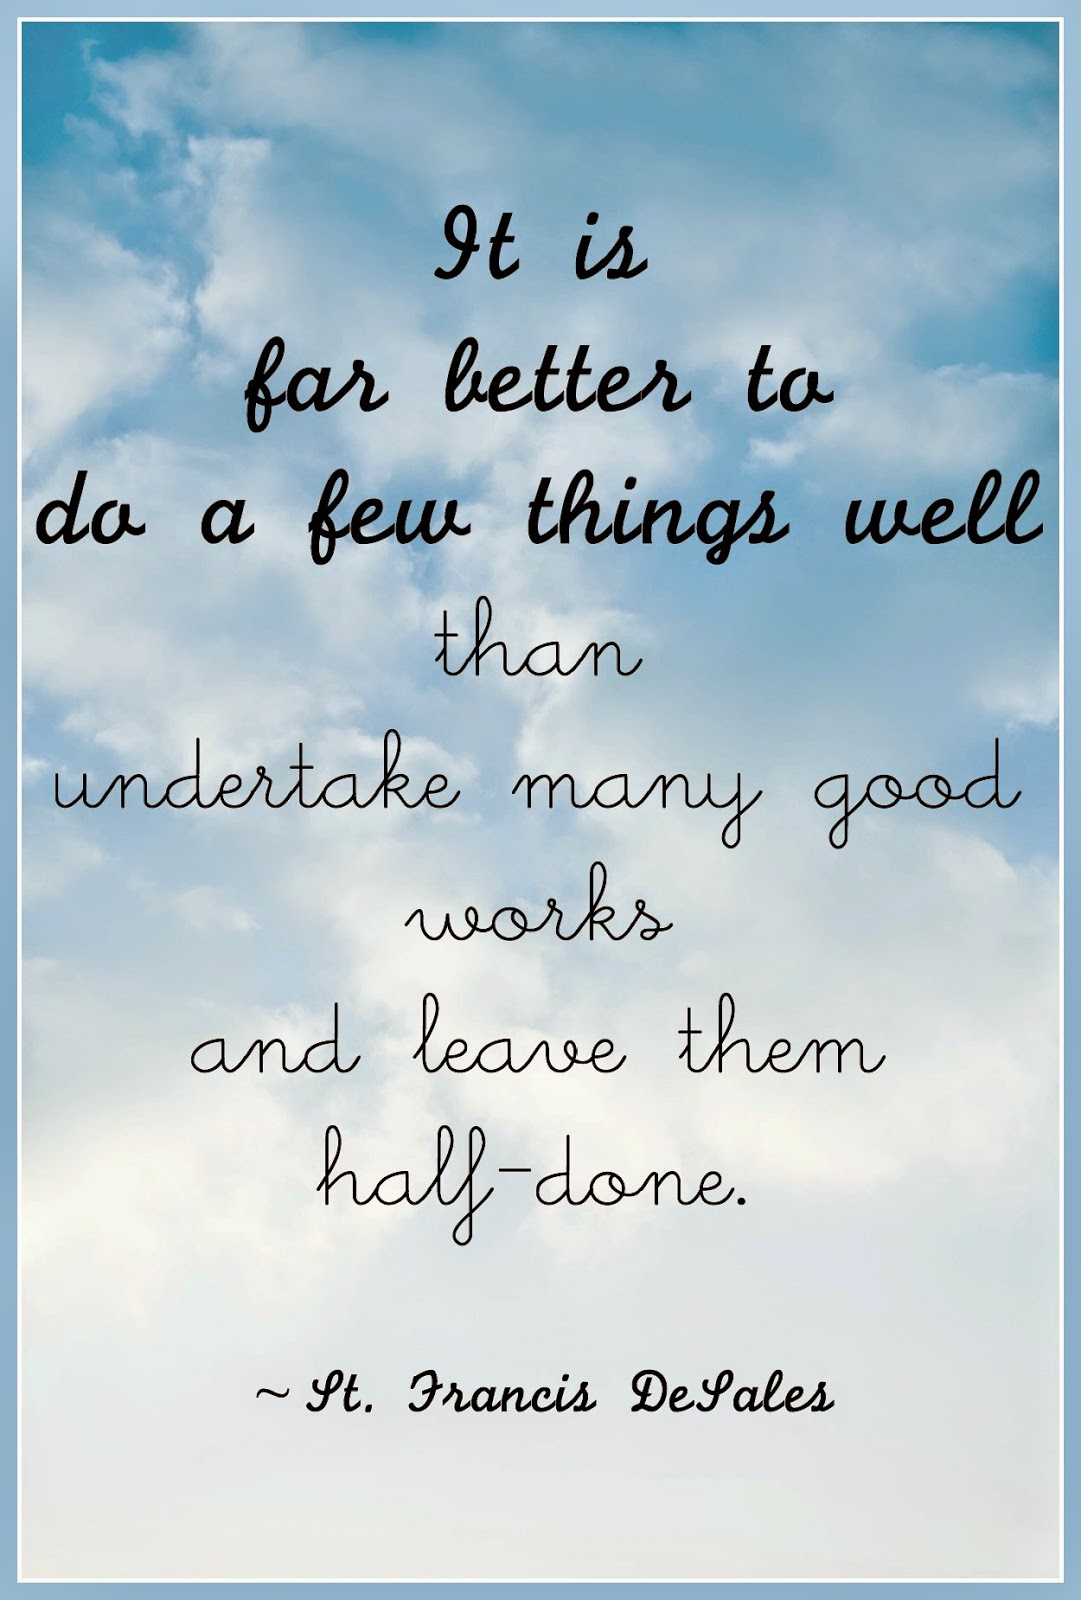 “It is far better to do a few things well than undertake many good works and leave them half-done.”  ~ St. Francis de Sales